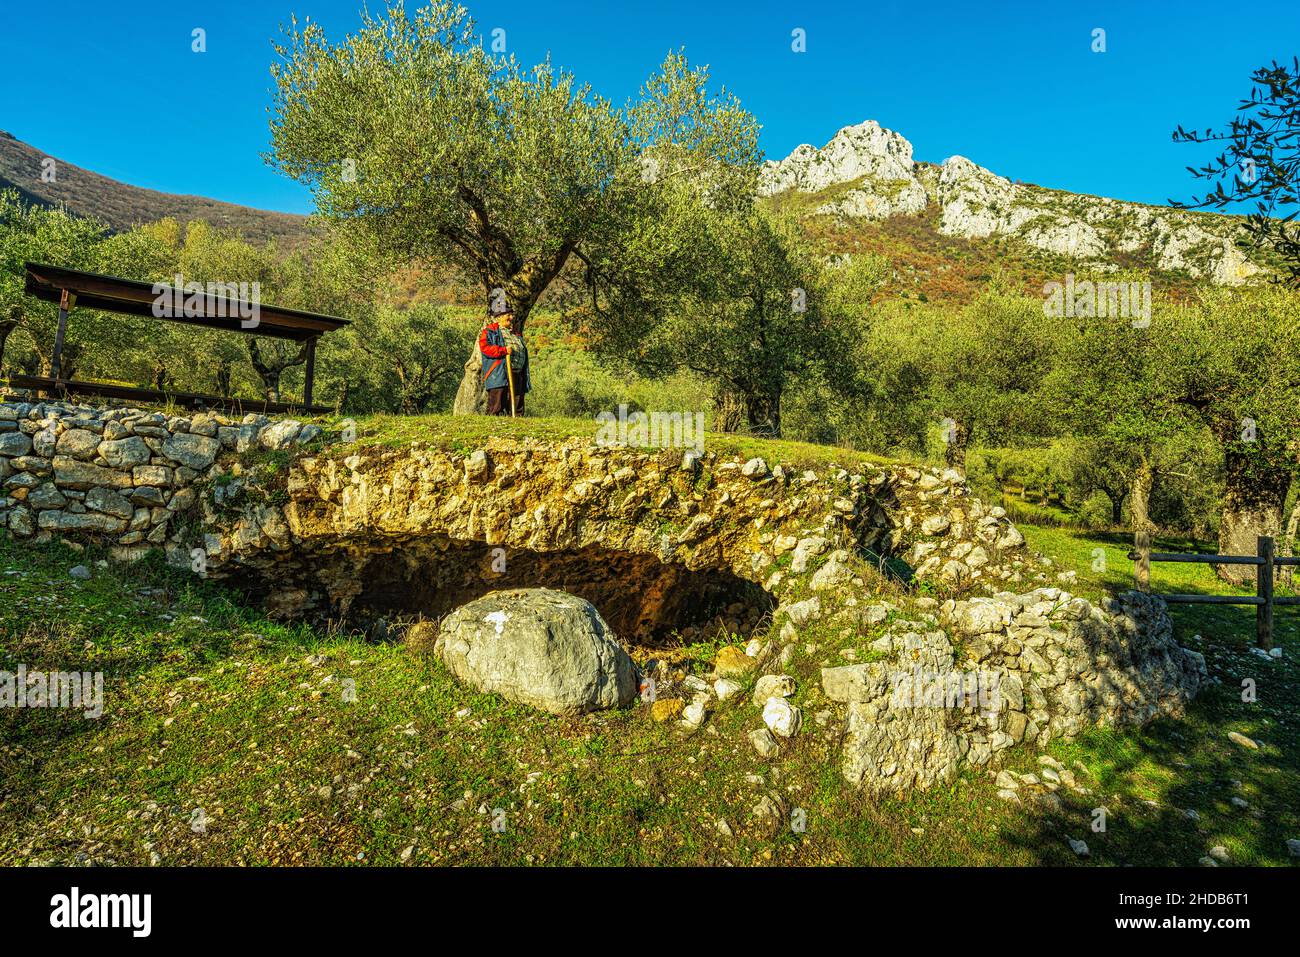 Remains of the ancient Roman cistern in the Parco dell'Olivo in Venafro. Venafro, Province of Isernia, Molise, Italy, Europe Stock Photo